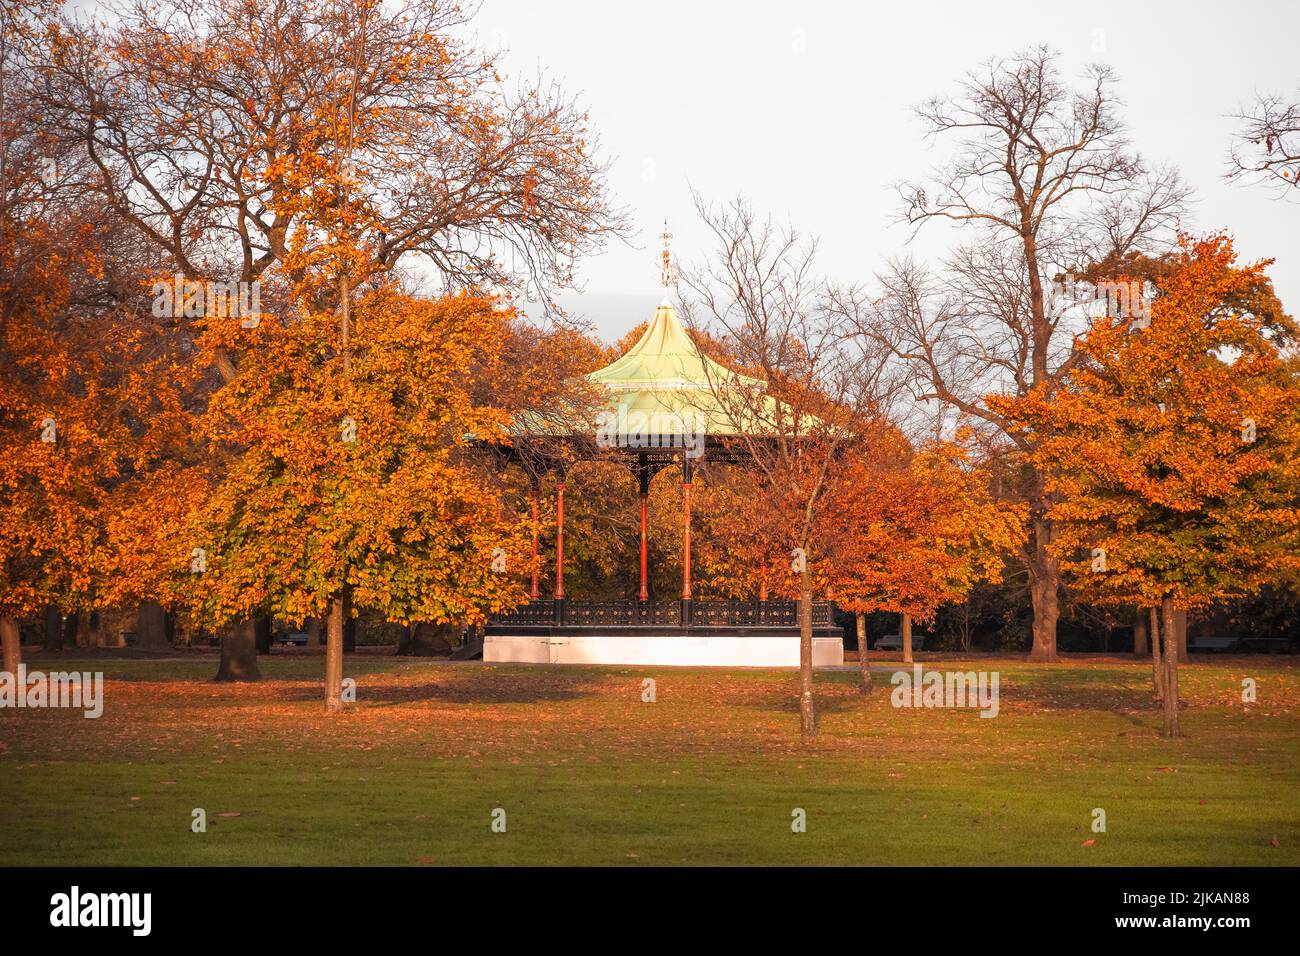 Autumn scene with Greenwich Park bandstand in London Stock Photo